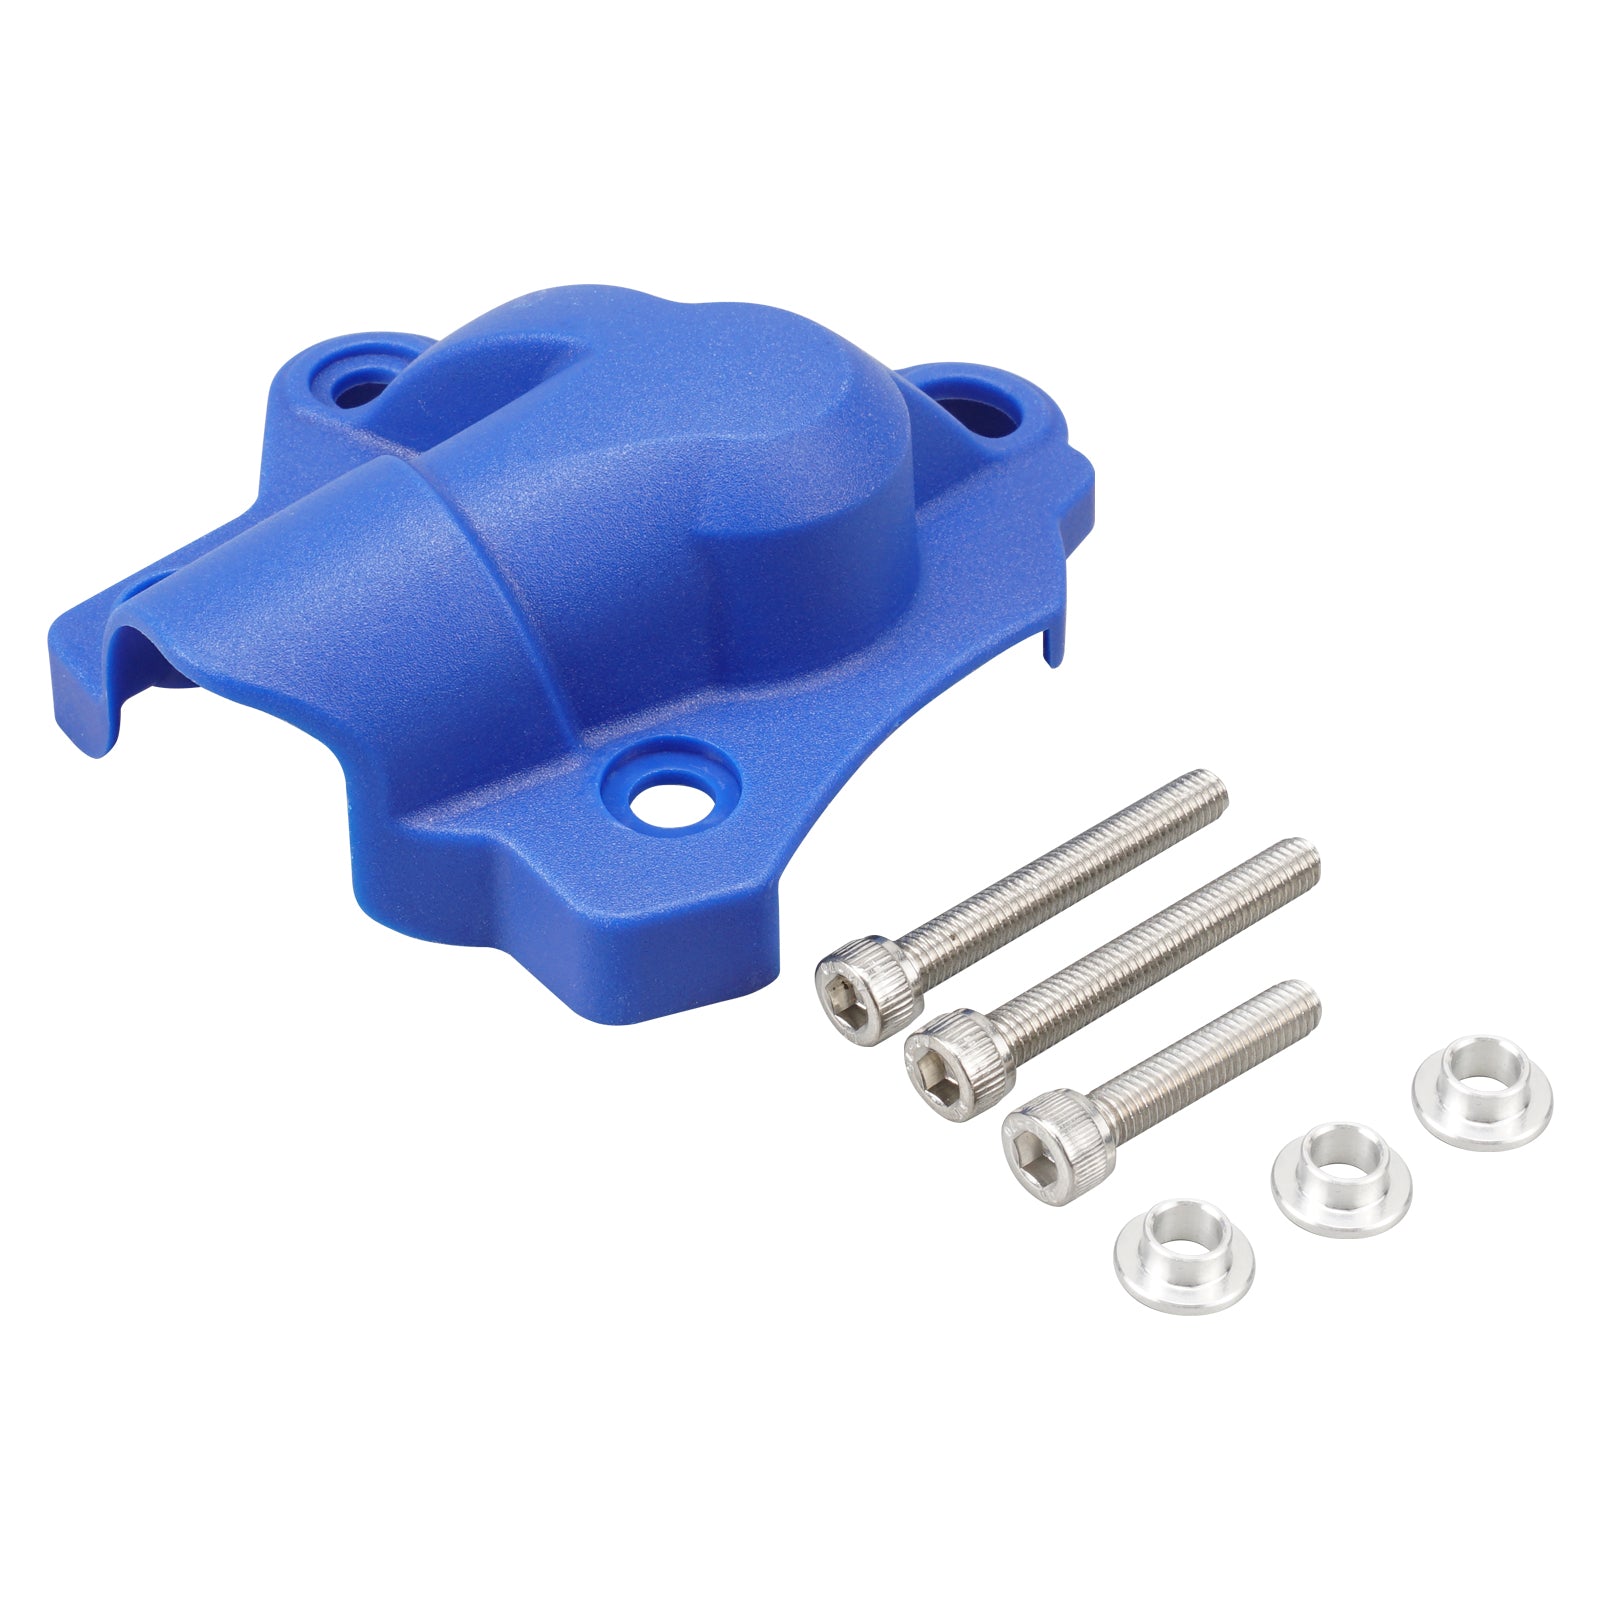 Water Pump Cover Protector For Husqvarna FC250 FC350 FE250